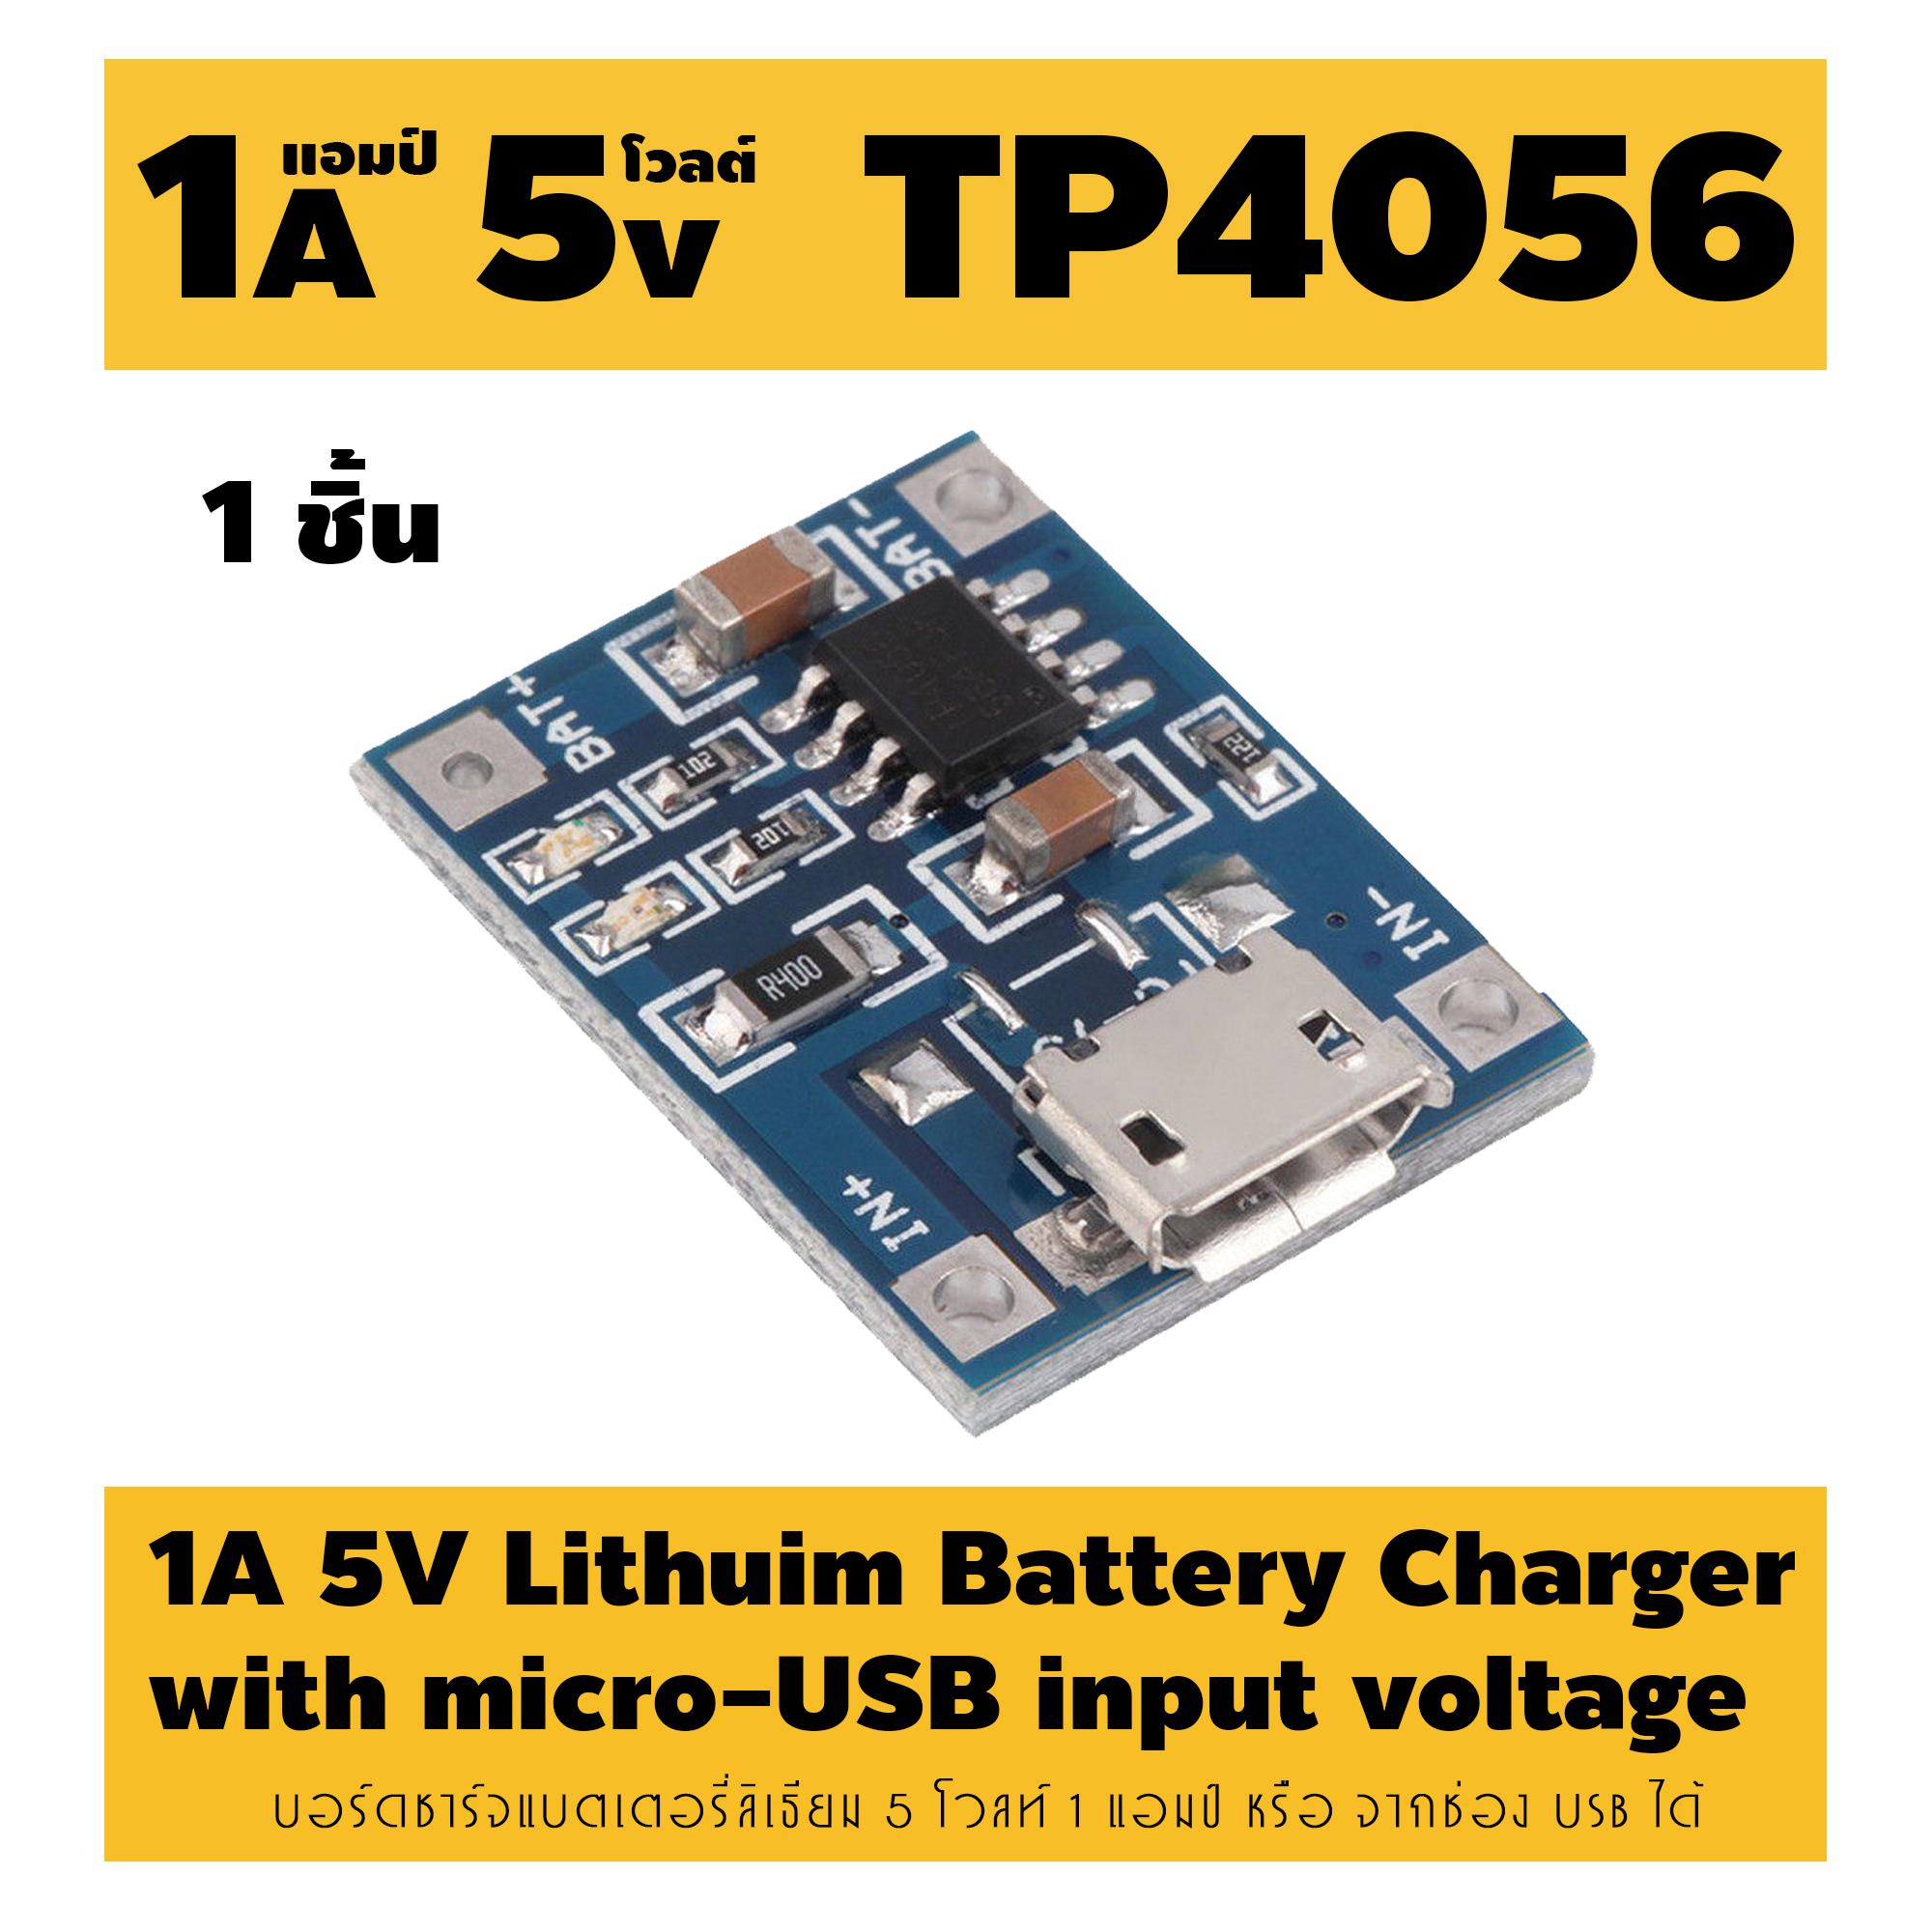 1A 5V TP4056 Lithium Battery Charger with micro-USB input voltage DIY Module